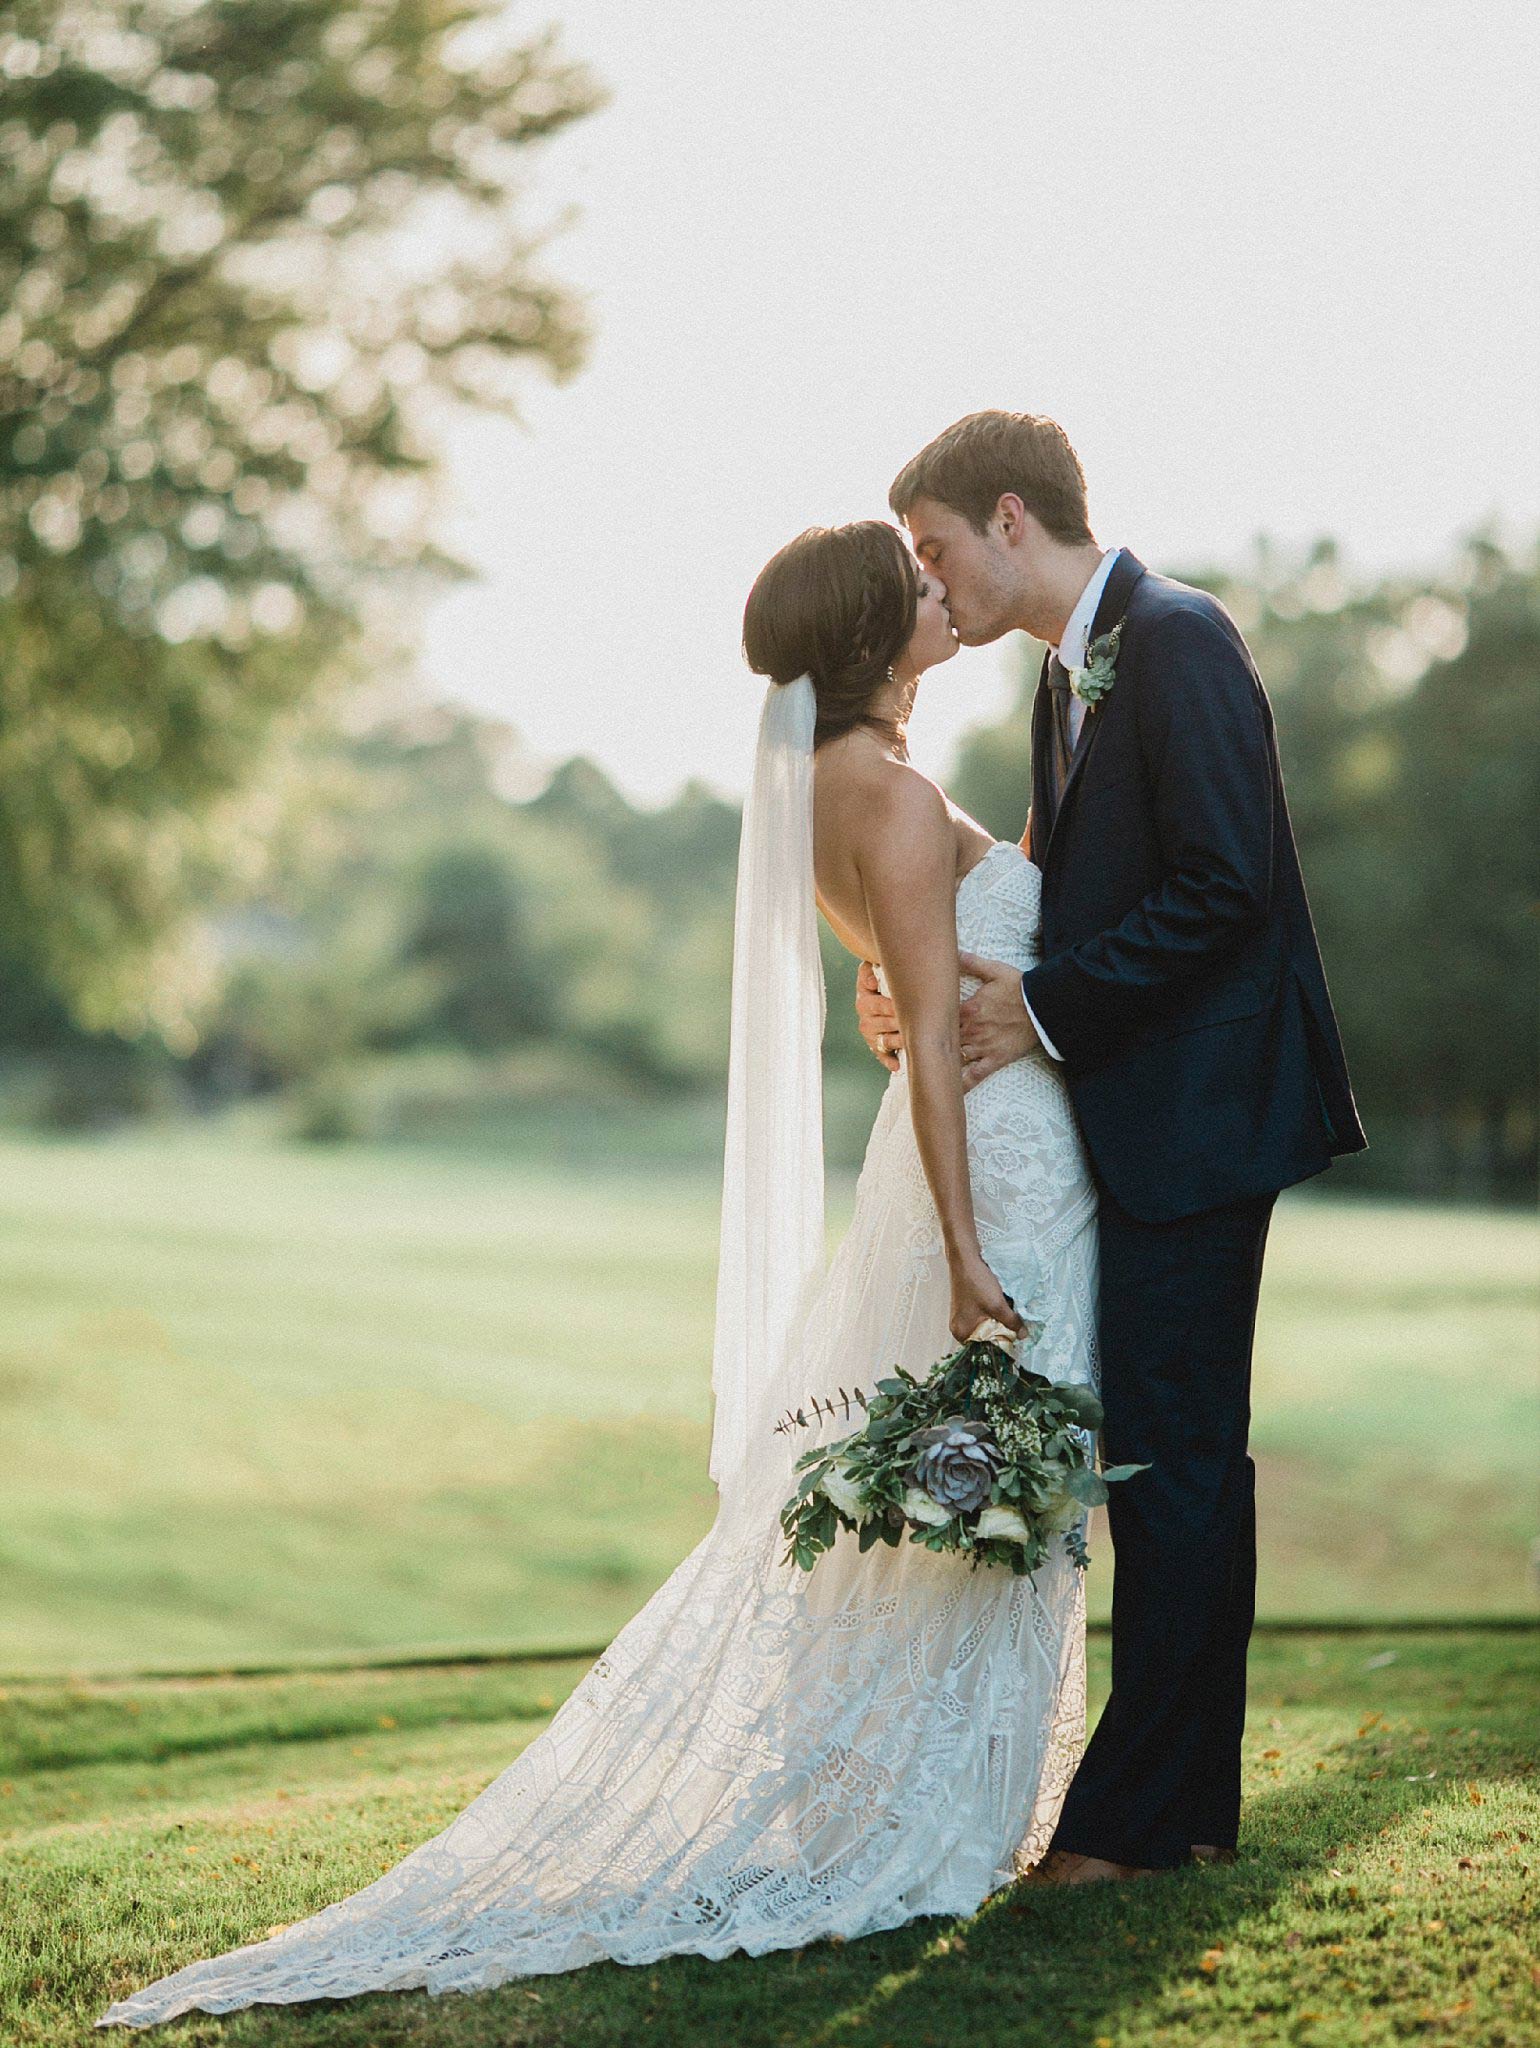 Bride wearing a lace boho dress kissing the groom while holding a greenery and succulent bouquet 